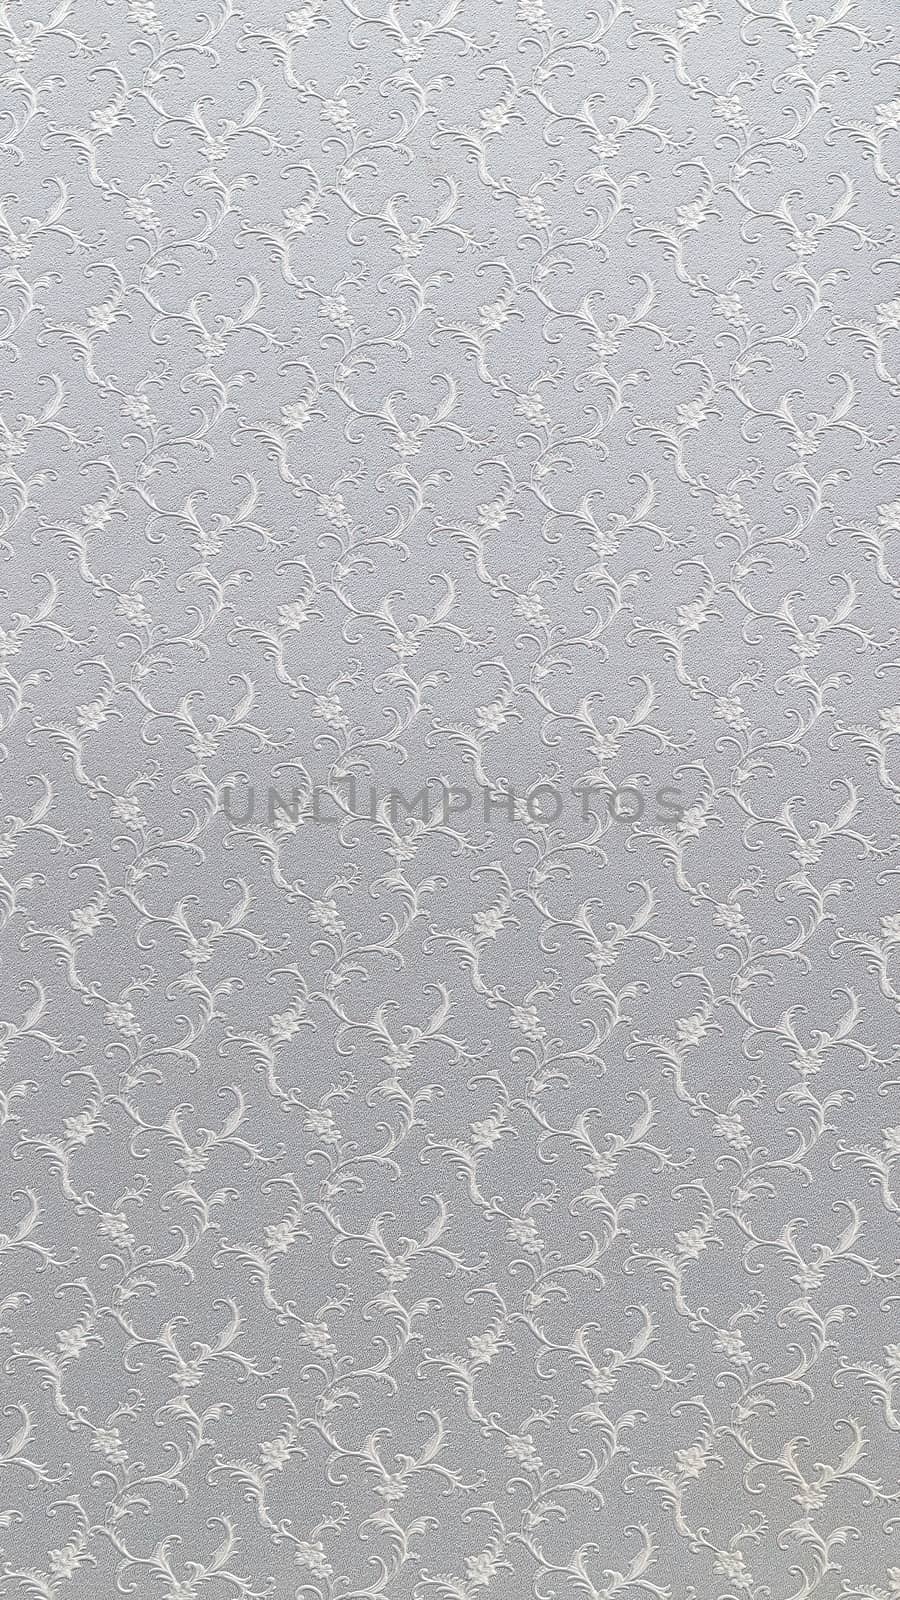 Embossed floral pattern on light gray paper. Textured paper with copy space. Motley gray-brown paper surface, texture closeup.